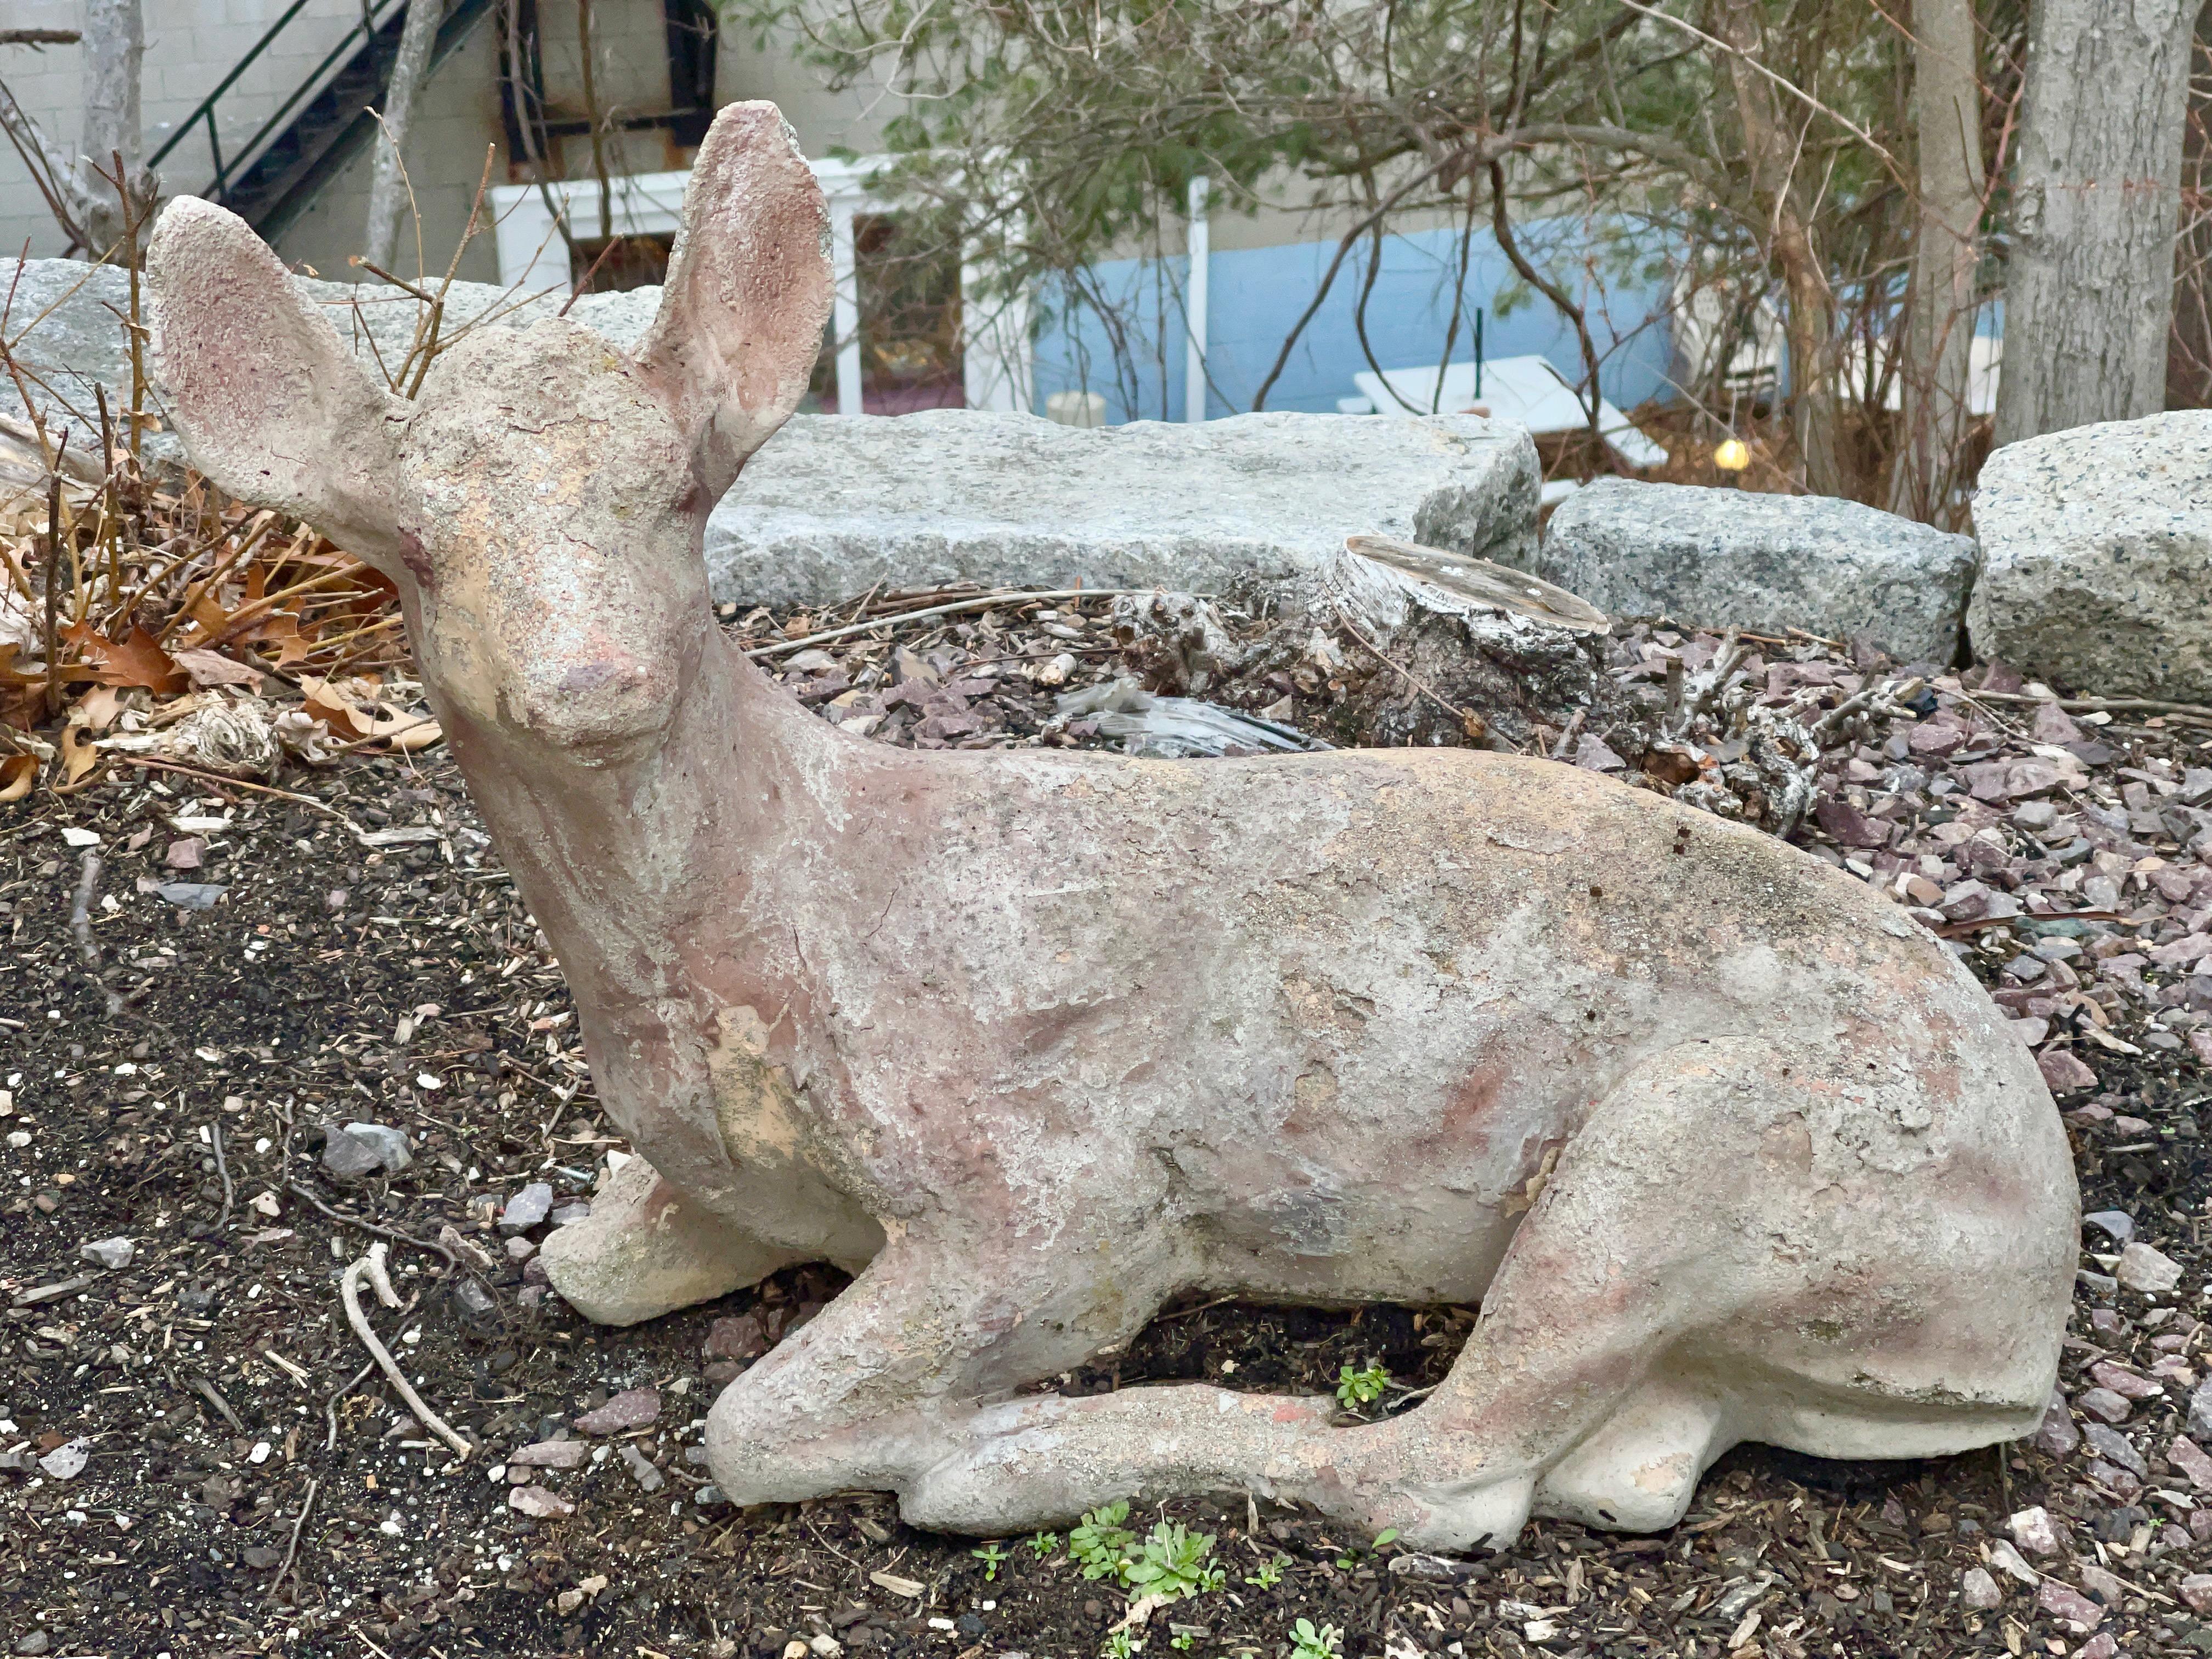 Vintage 1960's cast cement garden statue of a deer (doe?) in repose.
Measures: 21 inches high by 26 inches wide by 12 inches deep. Weight approx. 80 lbs.
Lovely time earned patina.
Available for local pickup or truck delivery.